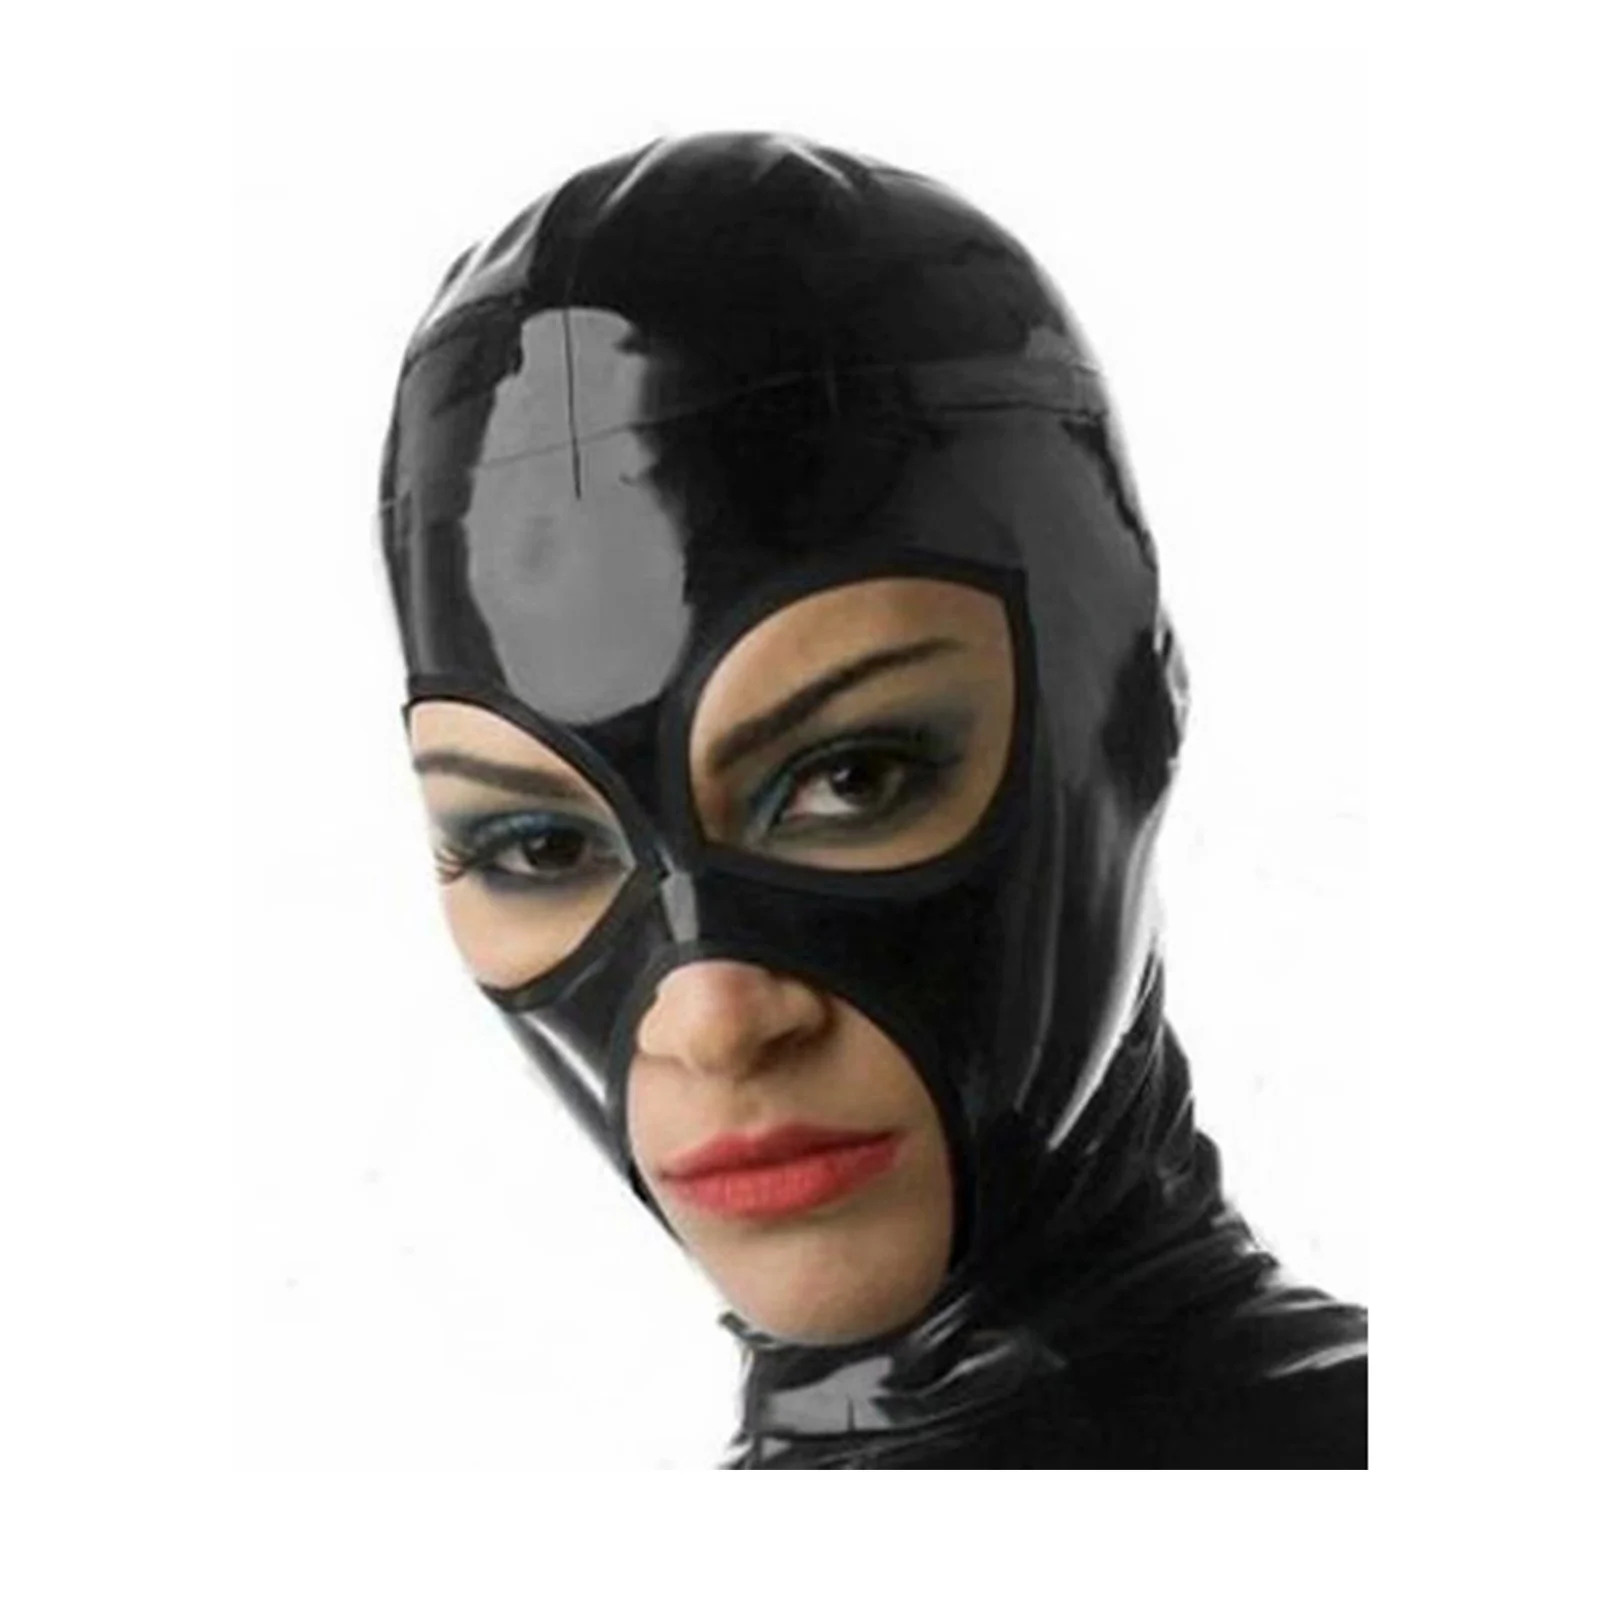 MONNIK Latex Mask Black Rubber Unisex Hood Open Eyes and Mouth Handmade for Latex Fetish Party Catsuit Halloween Clubwear outdoor deck dj ktv party stage spotlight cooker hood ip65 1w 12v mini led ceiling cabinet lighting lamp cabin downlight